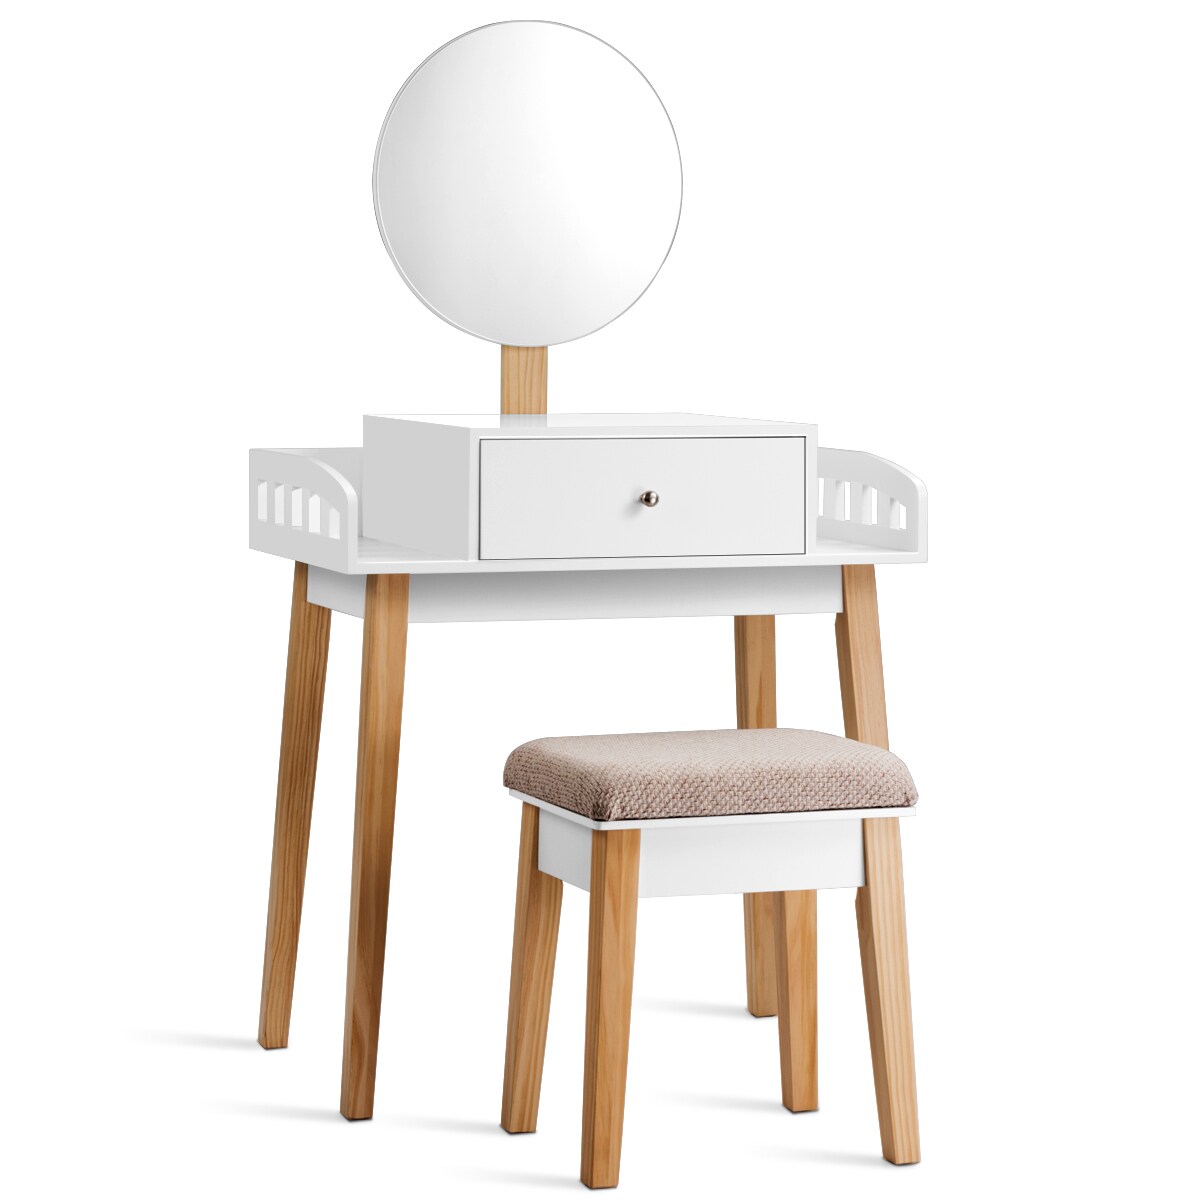 Gymax Makeup Dressing Table Stool Wooden Vanity Set w/ Round Mirror Drawer